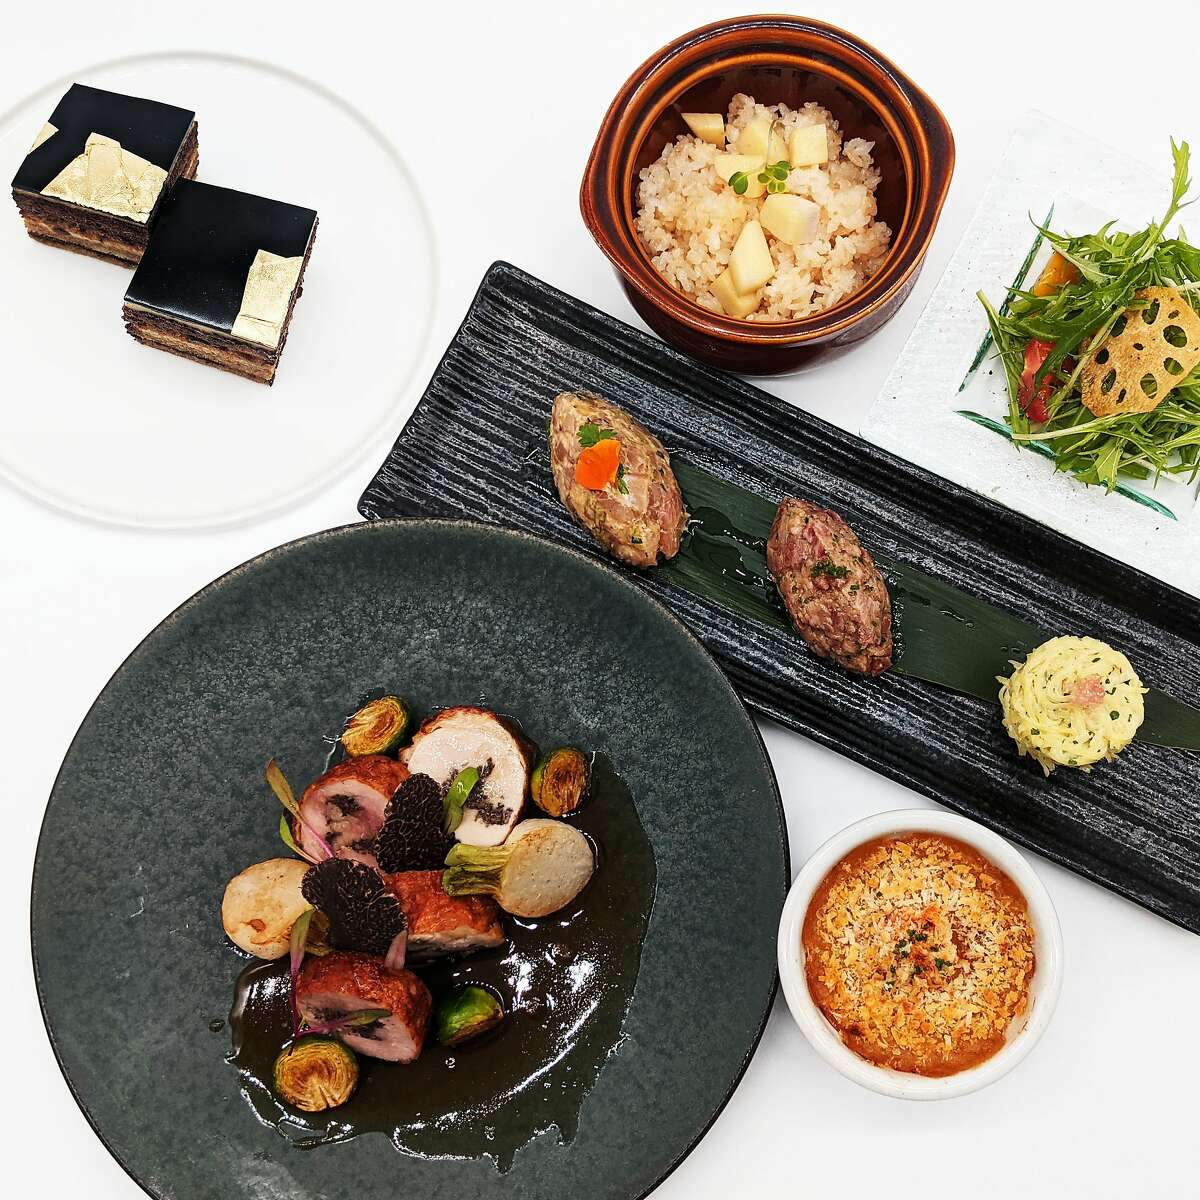 The spread of dishes for Fish & Bird Sousaku Izakaya's five-course Valentine's Day menu, including guinea fowl ballotine and tartare three days.